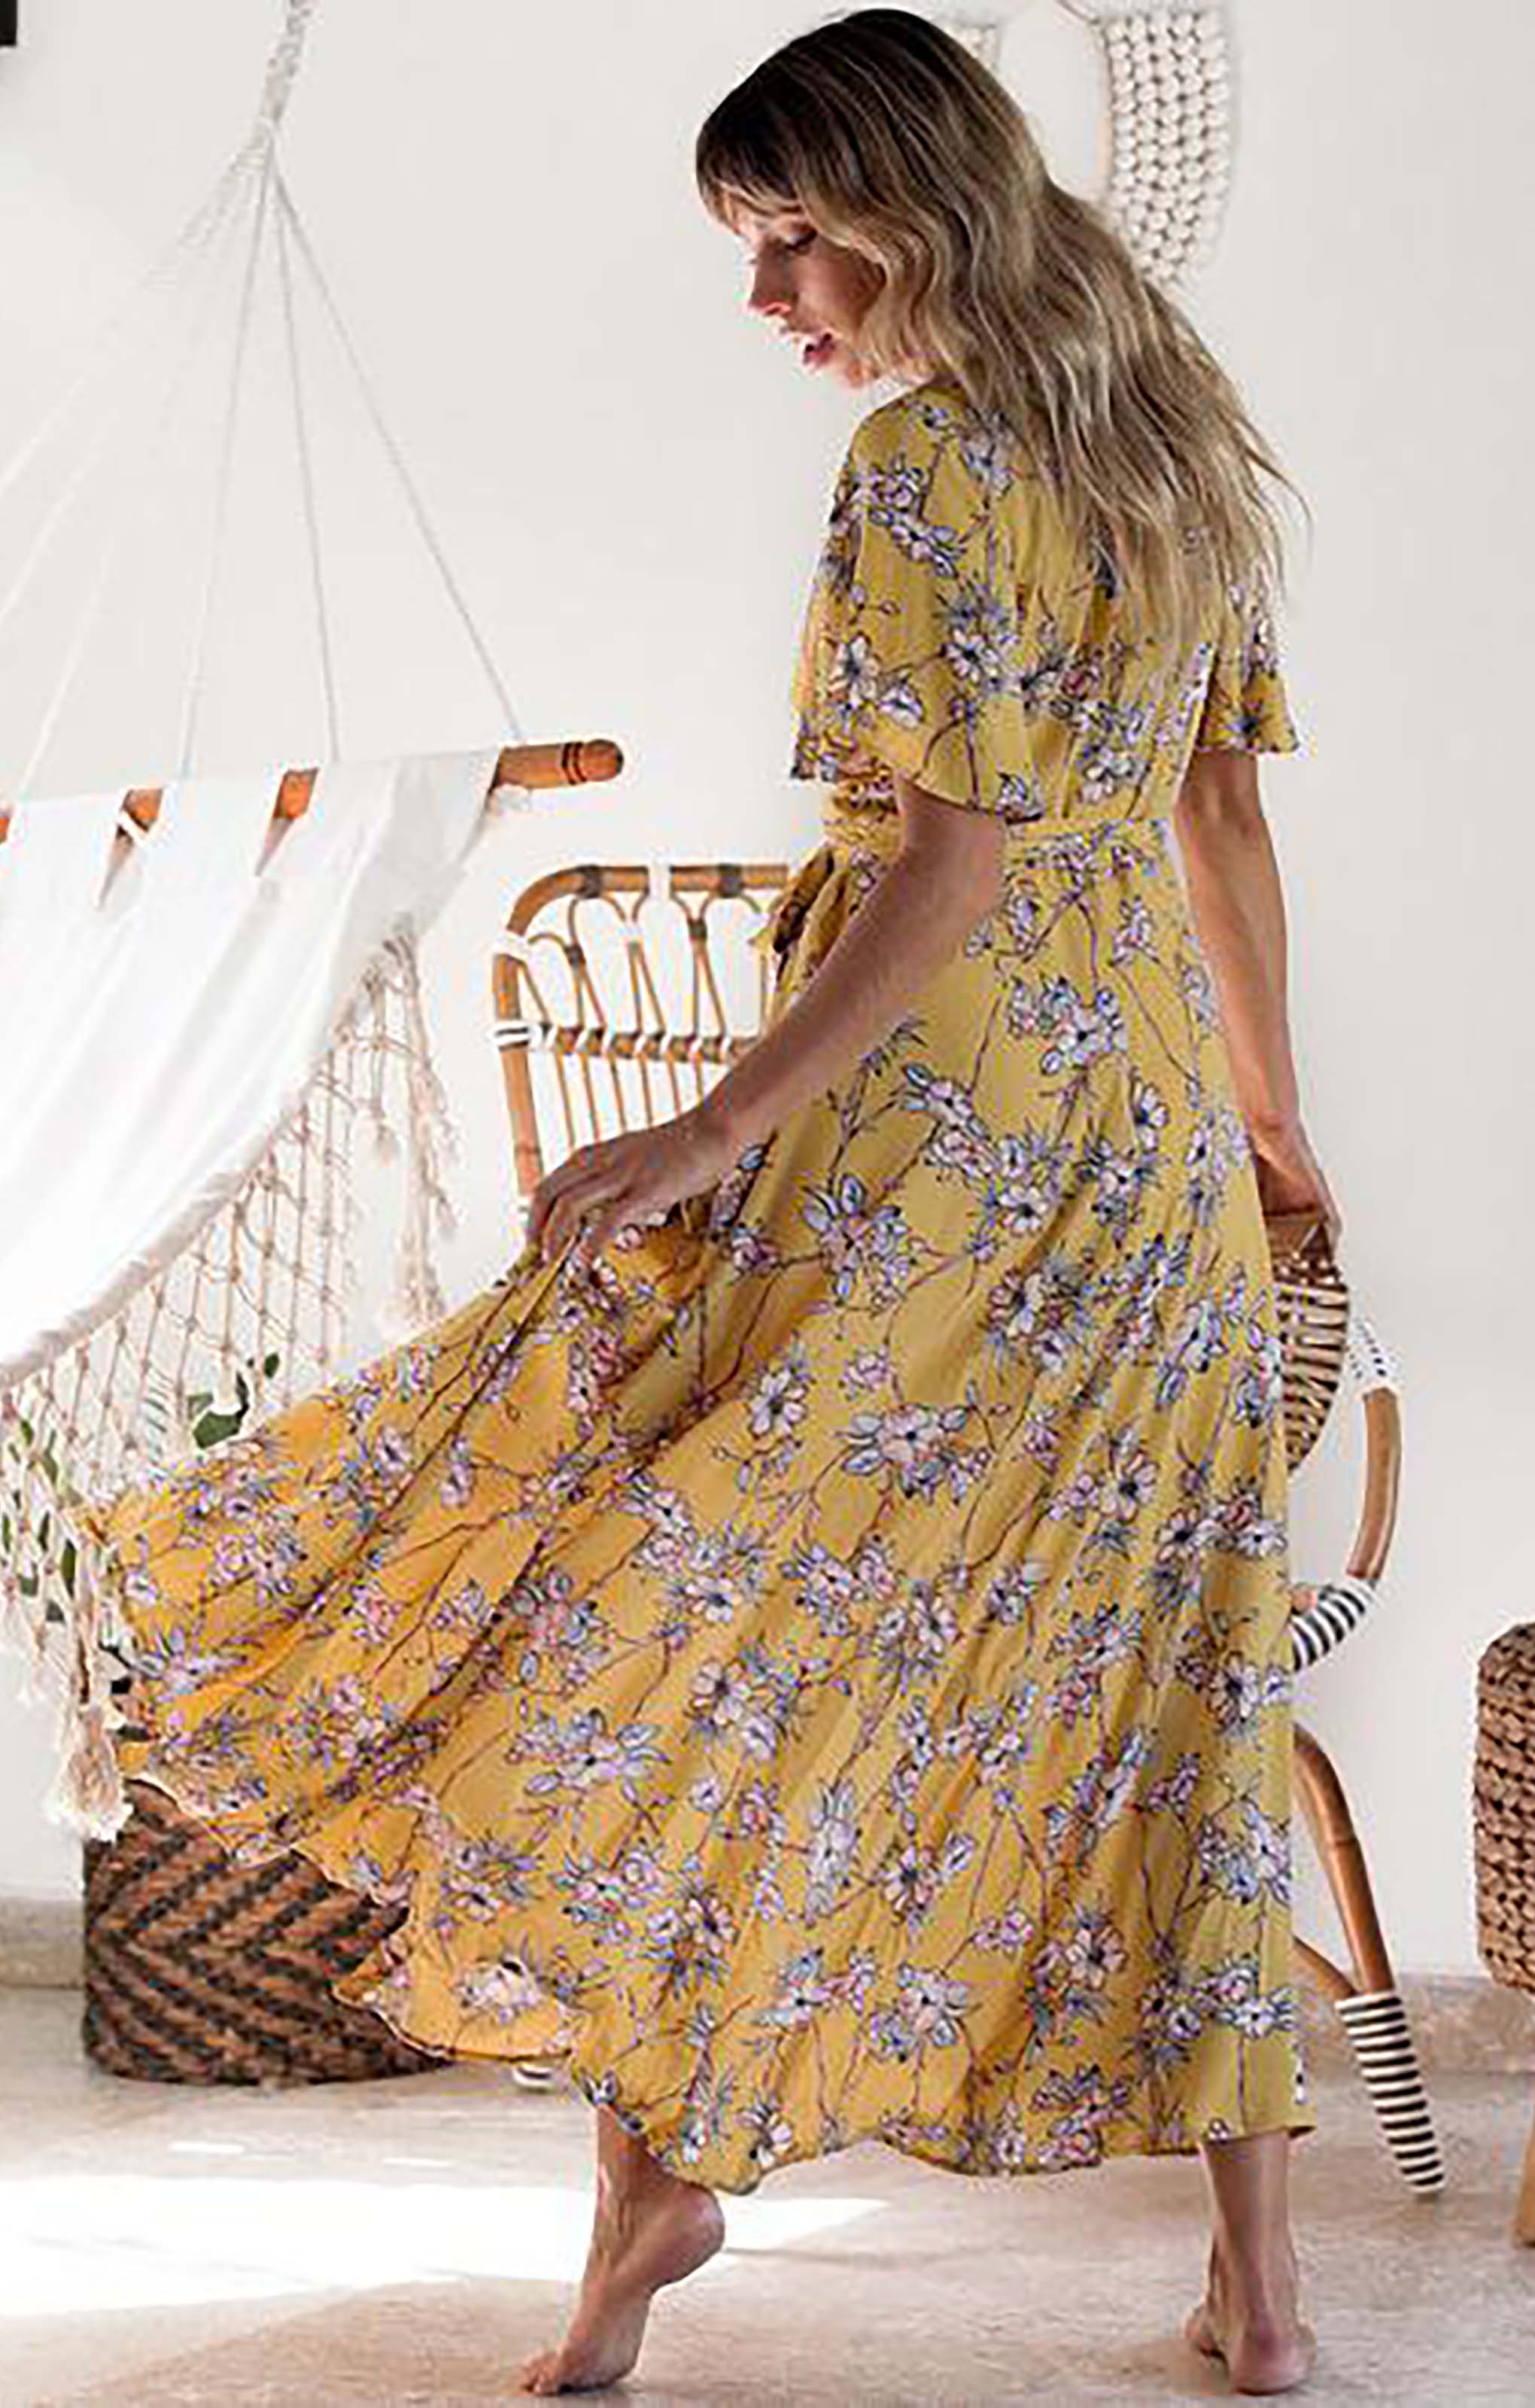 Seven Wonders Yellow Floral Print Wrap Dress product image